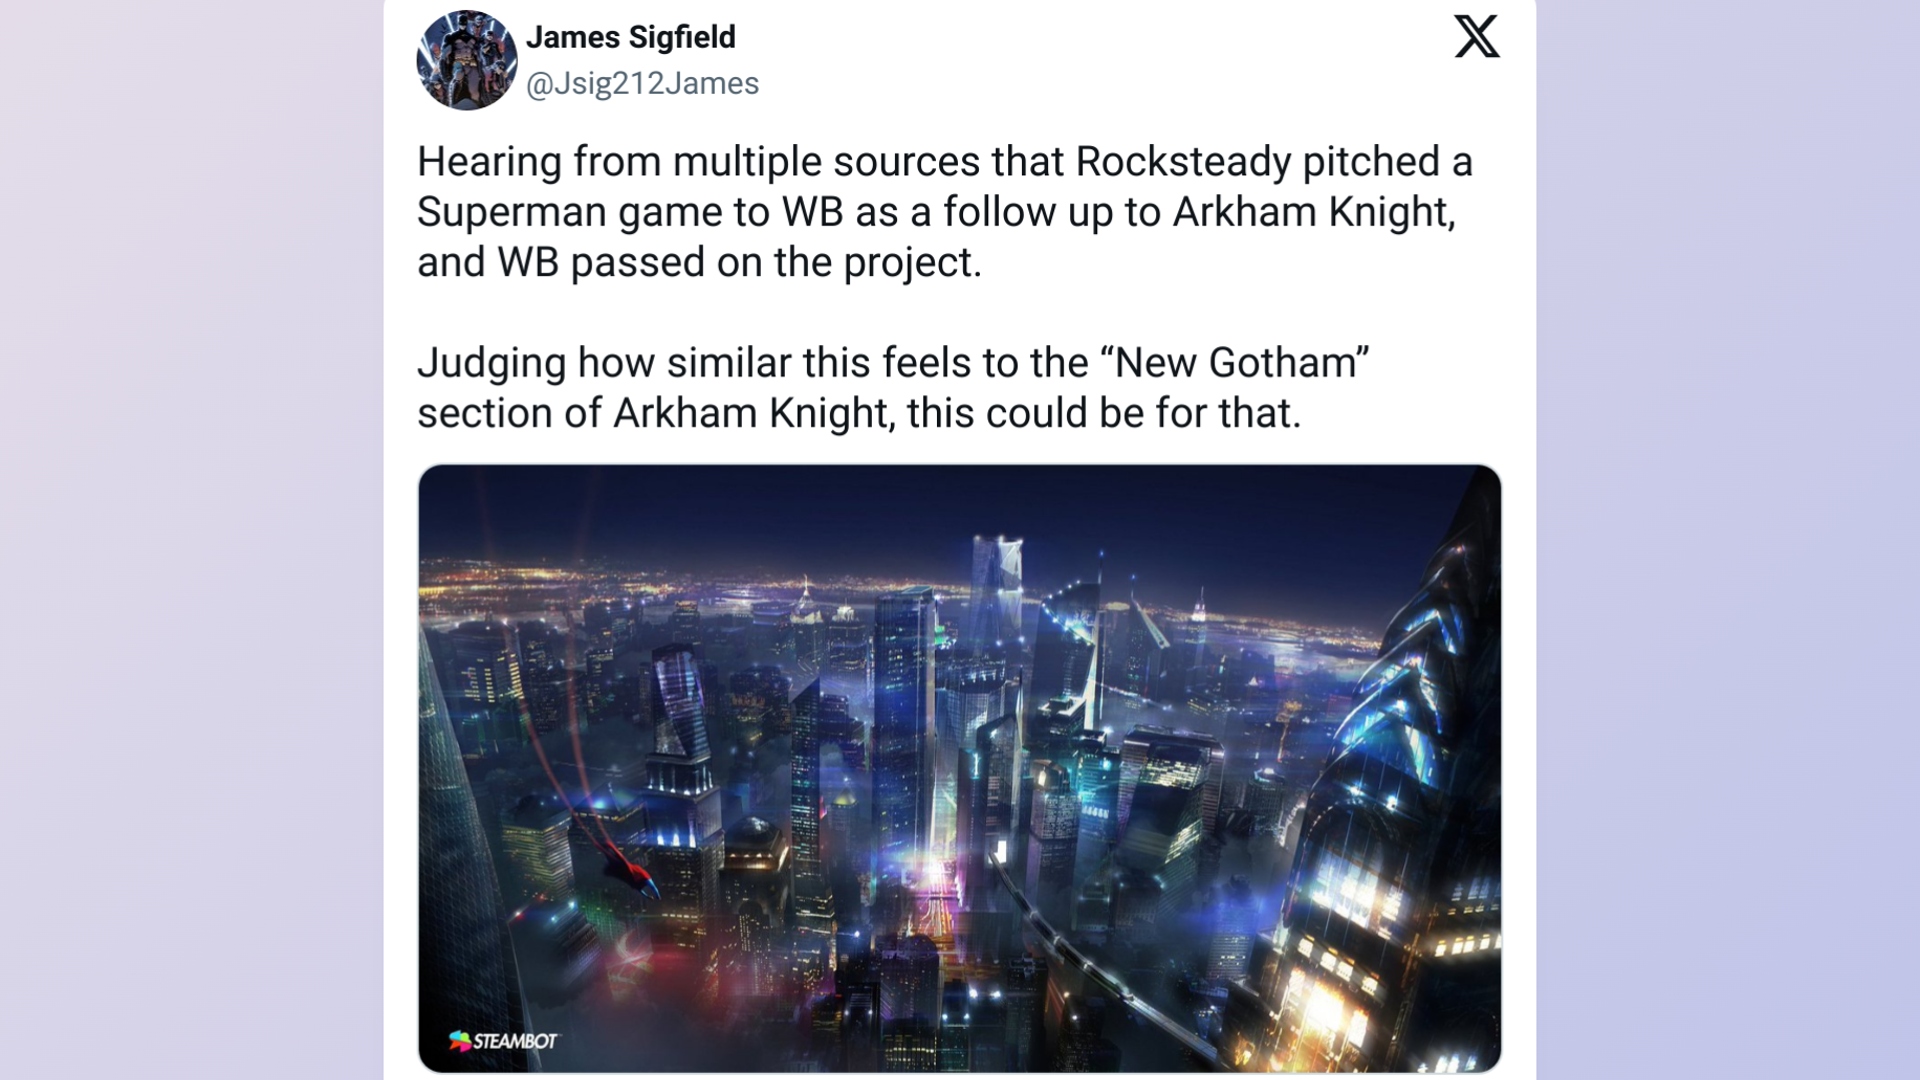 James Sigfield's initial claim regarding Rocksteady Studios pitching a Superman game